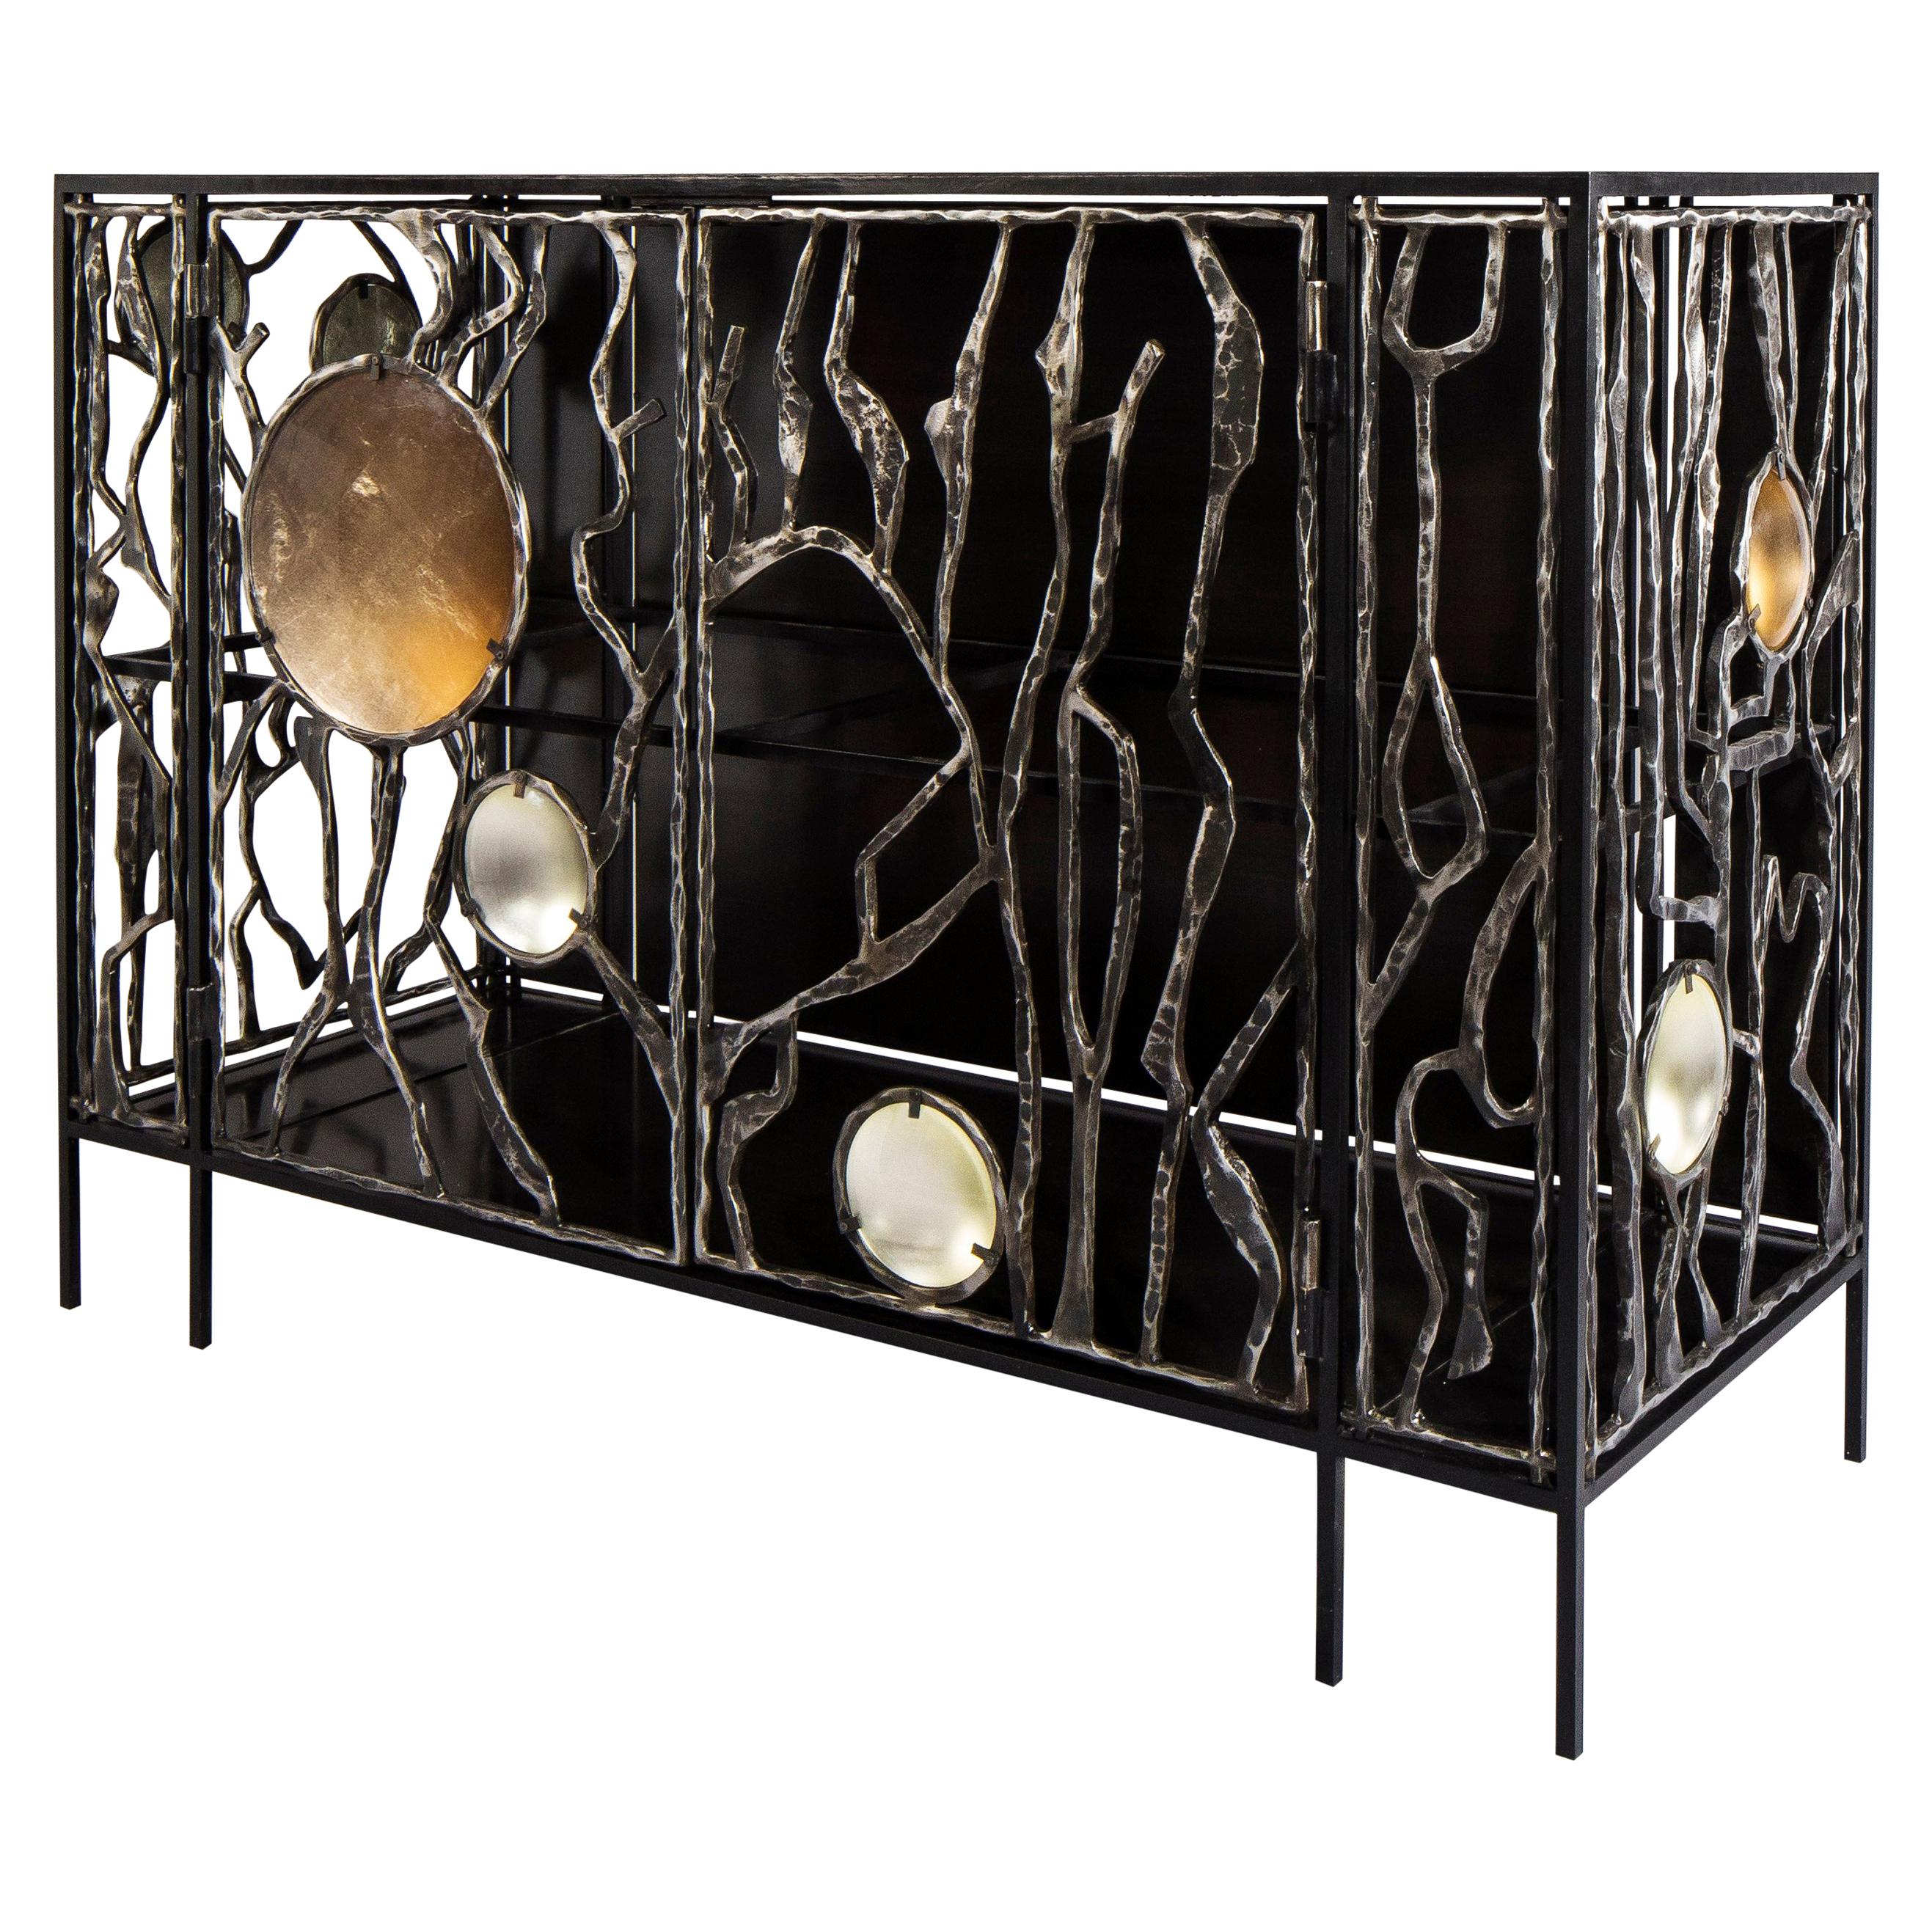 Wrought Iron and Glass Cabinet by Christophe Côme